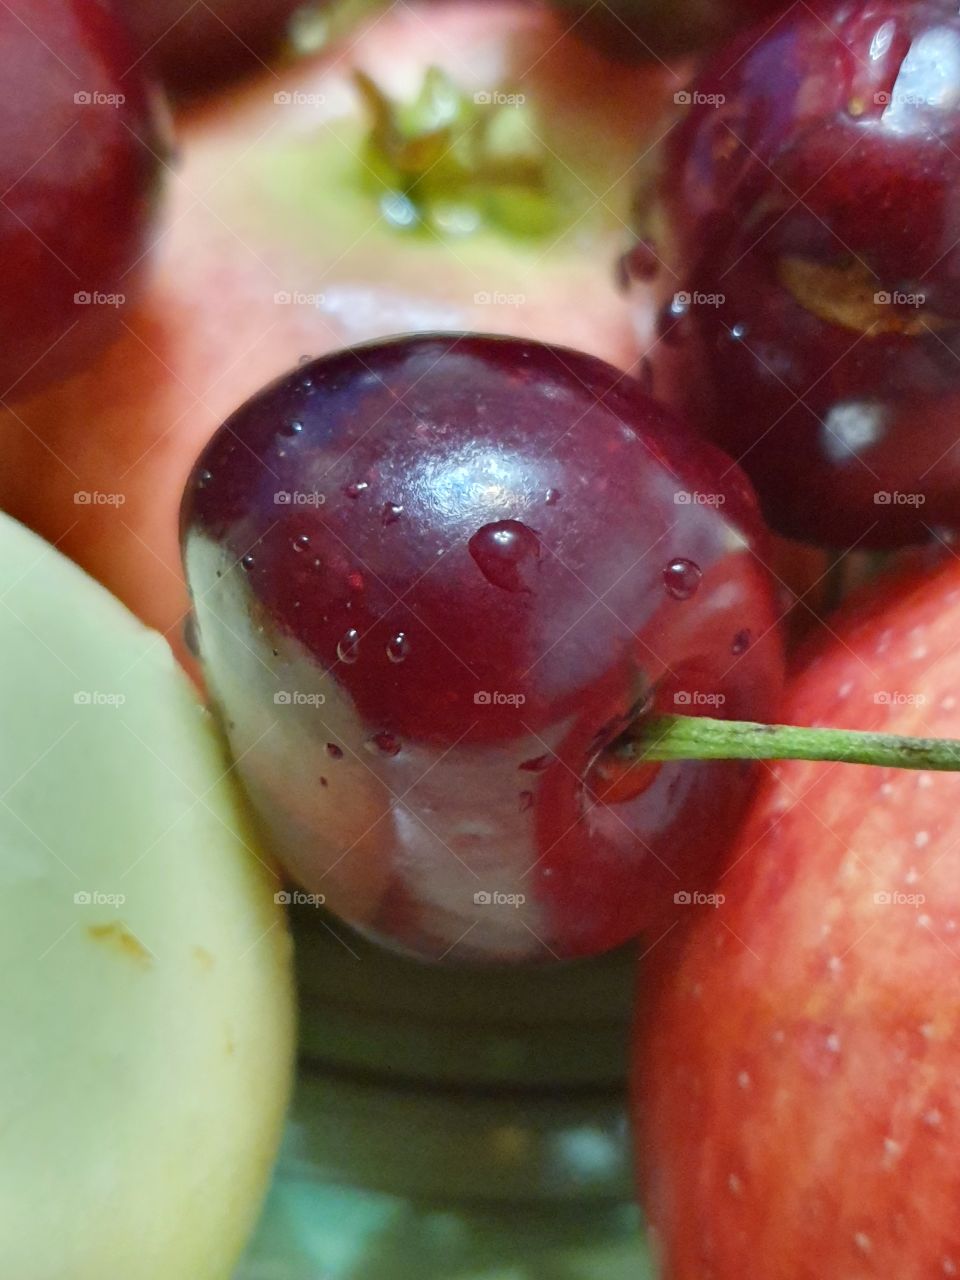 cherry and apples closeup